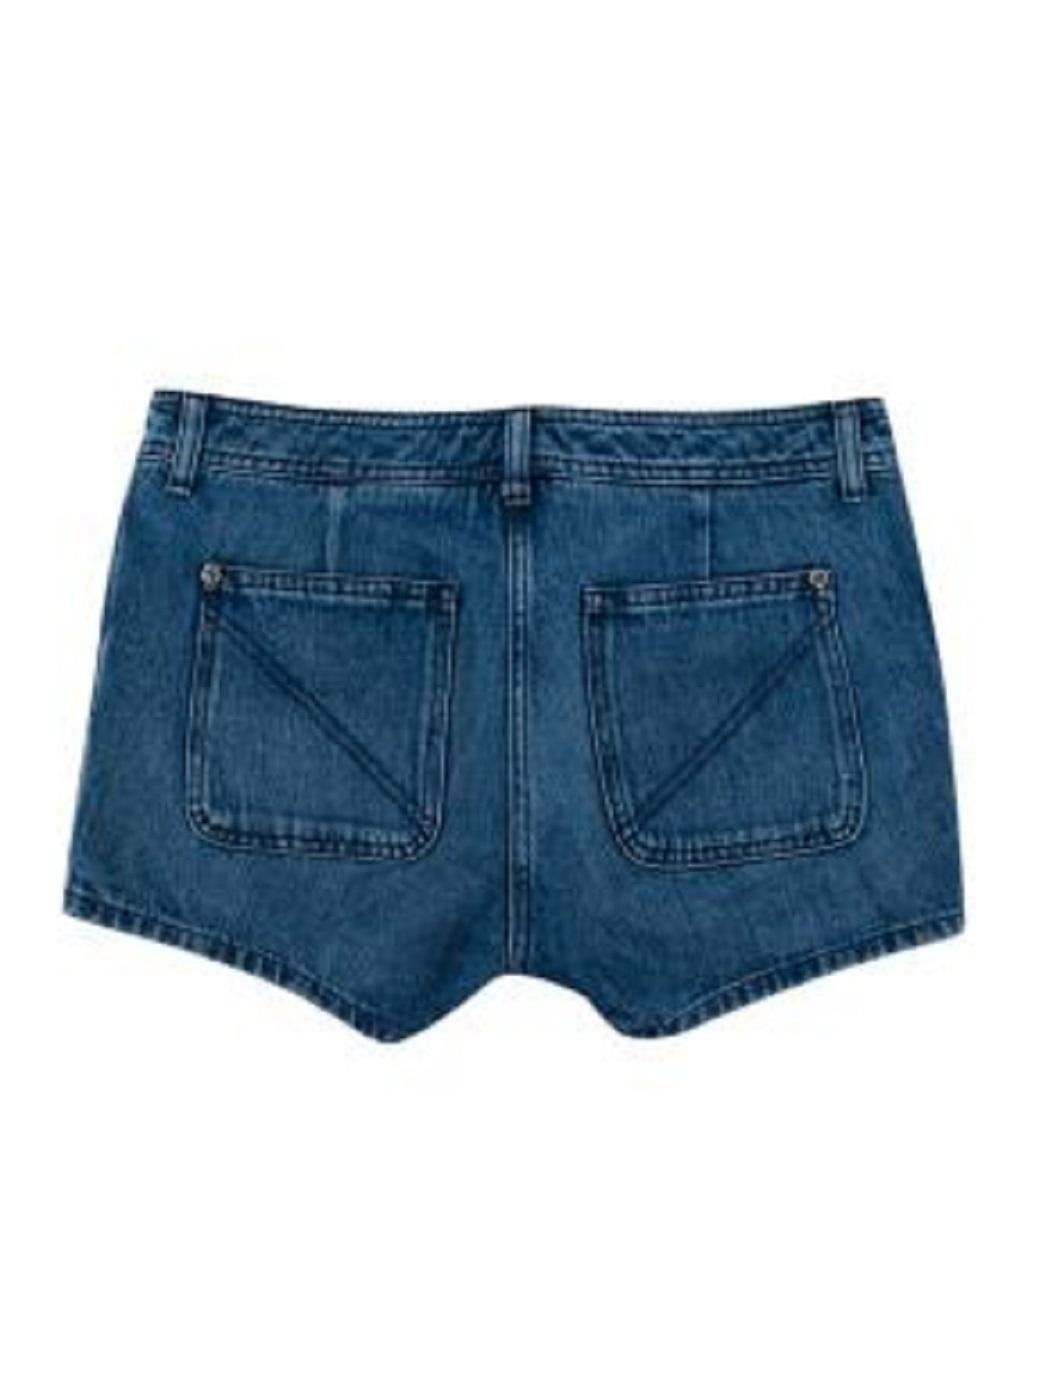 Chanel Denim shorts

- Button and zip fastening
- Belt loops
- Pocket detailings
- Branded buttons
- Short length

Material
100% Cotton

Made in Italy

9.5/10 Excellent condition

PLEASE NOTE, THESE ITEMS ARE PRE-OWNED AND MAY SHOW SIGNS OF